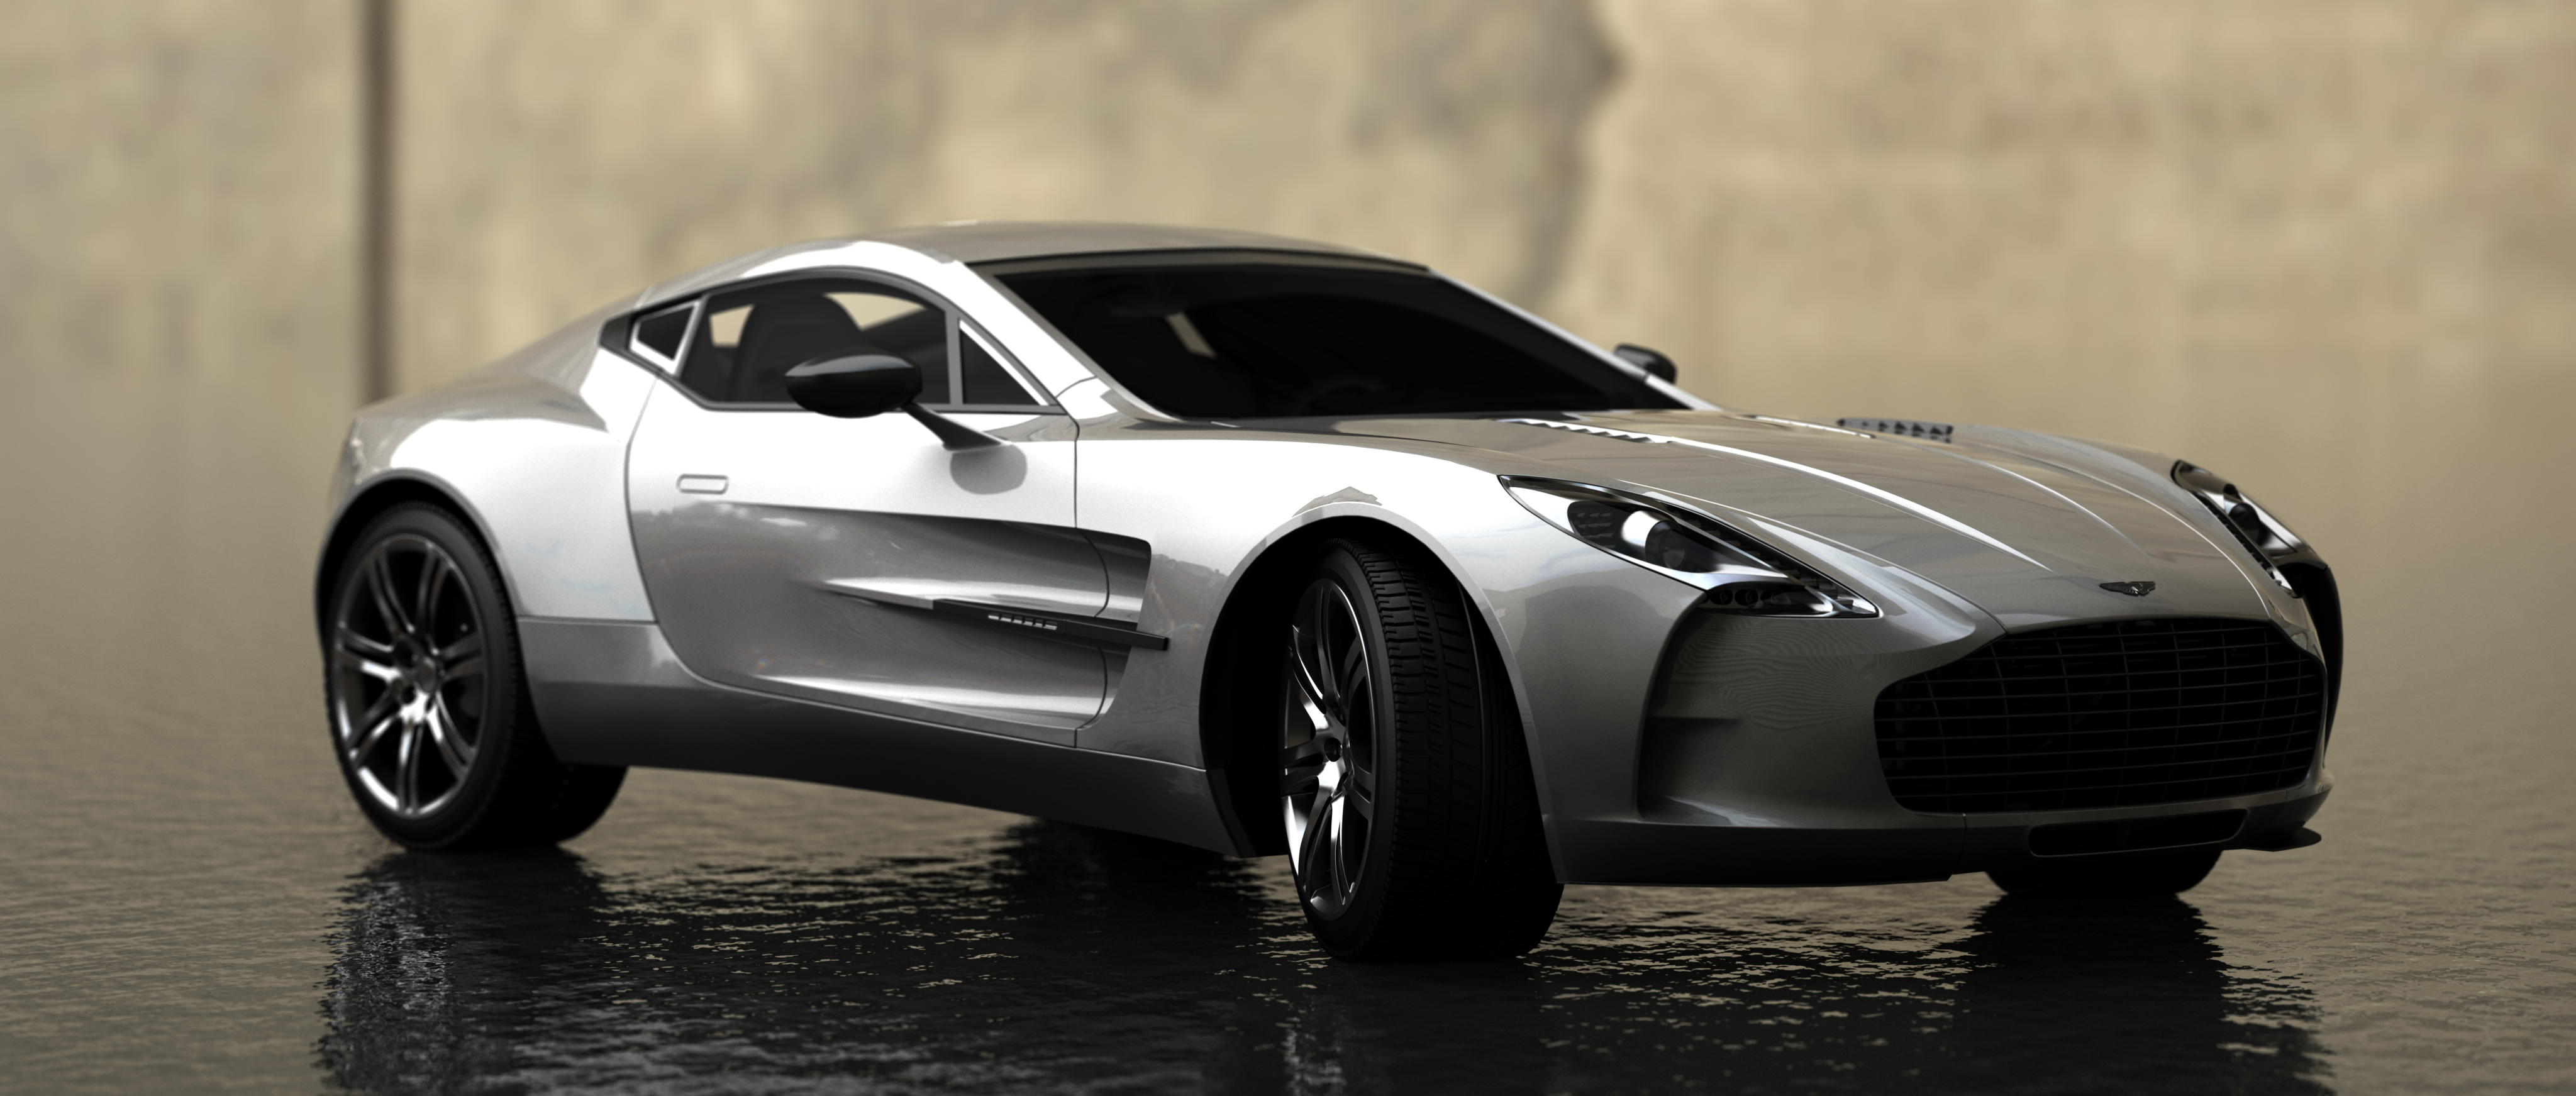 Aston Martin One-77 Pics, Vehicles Collection